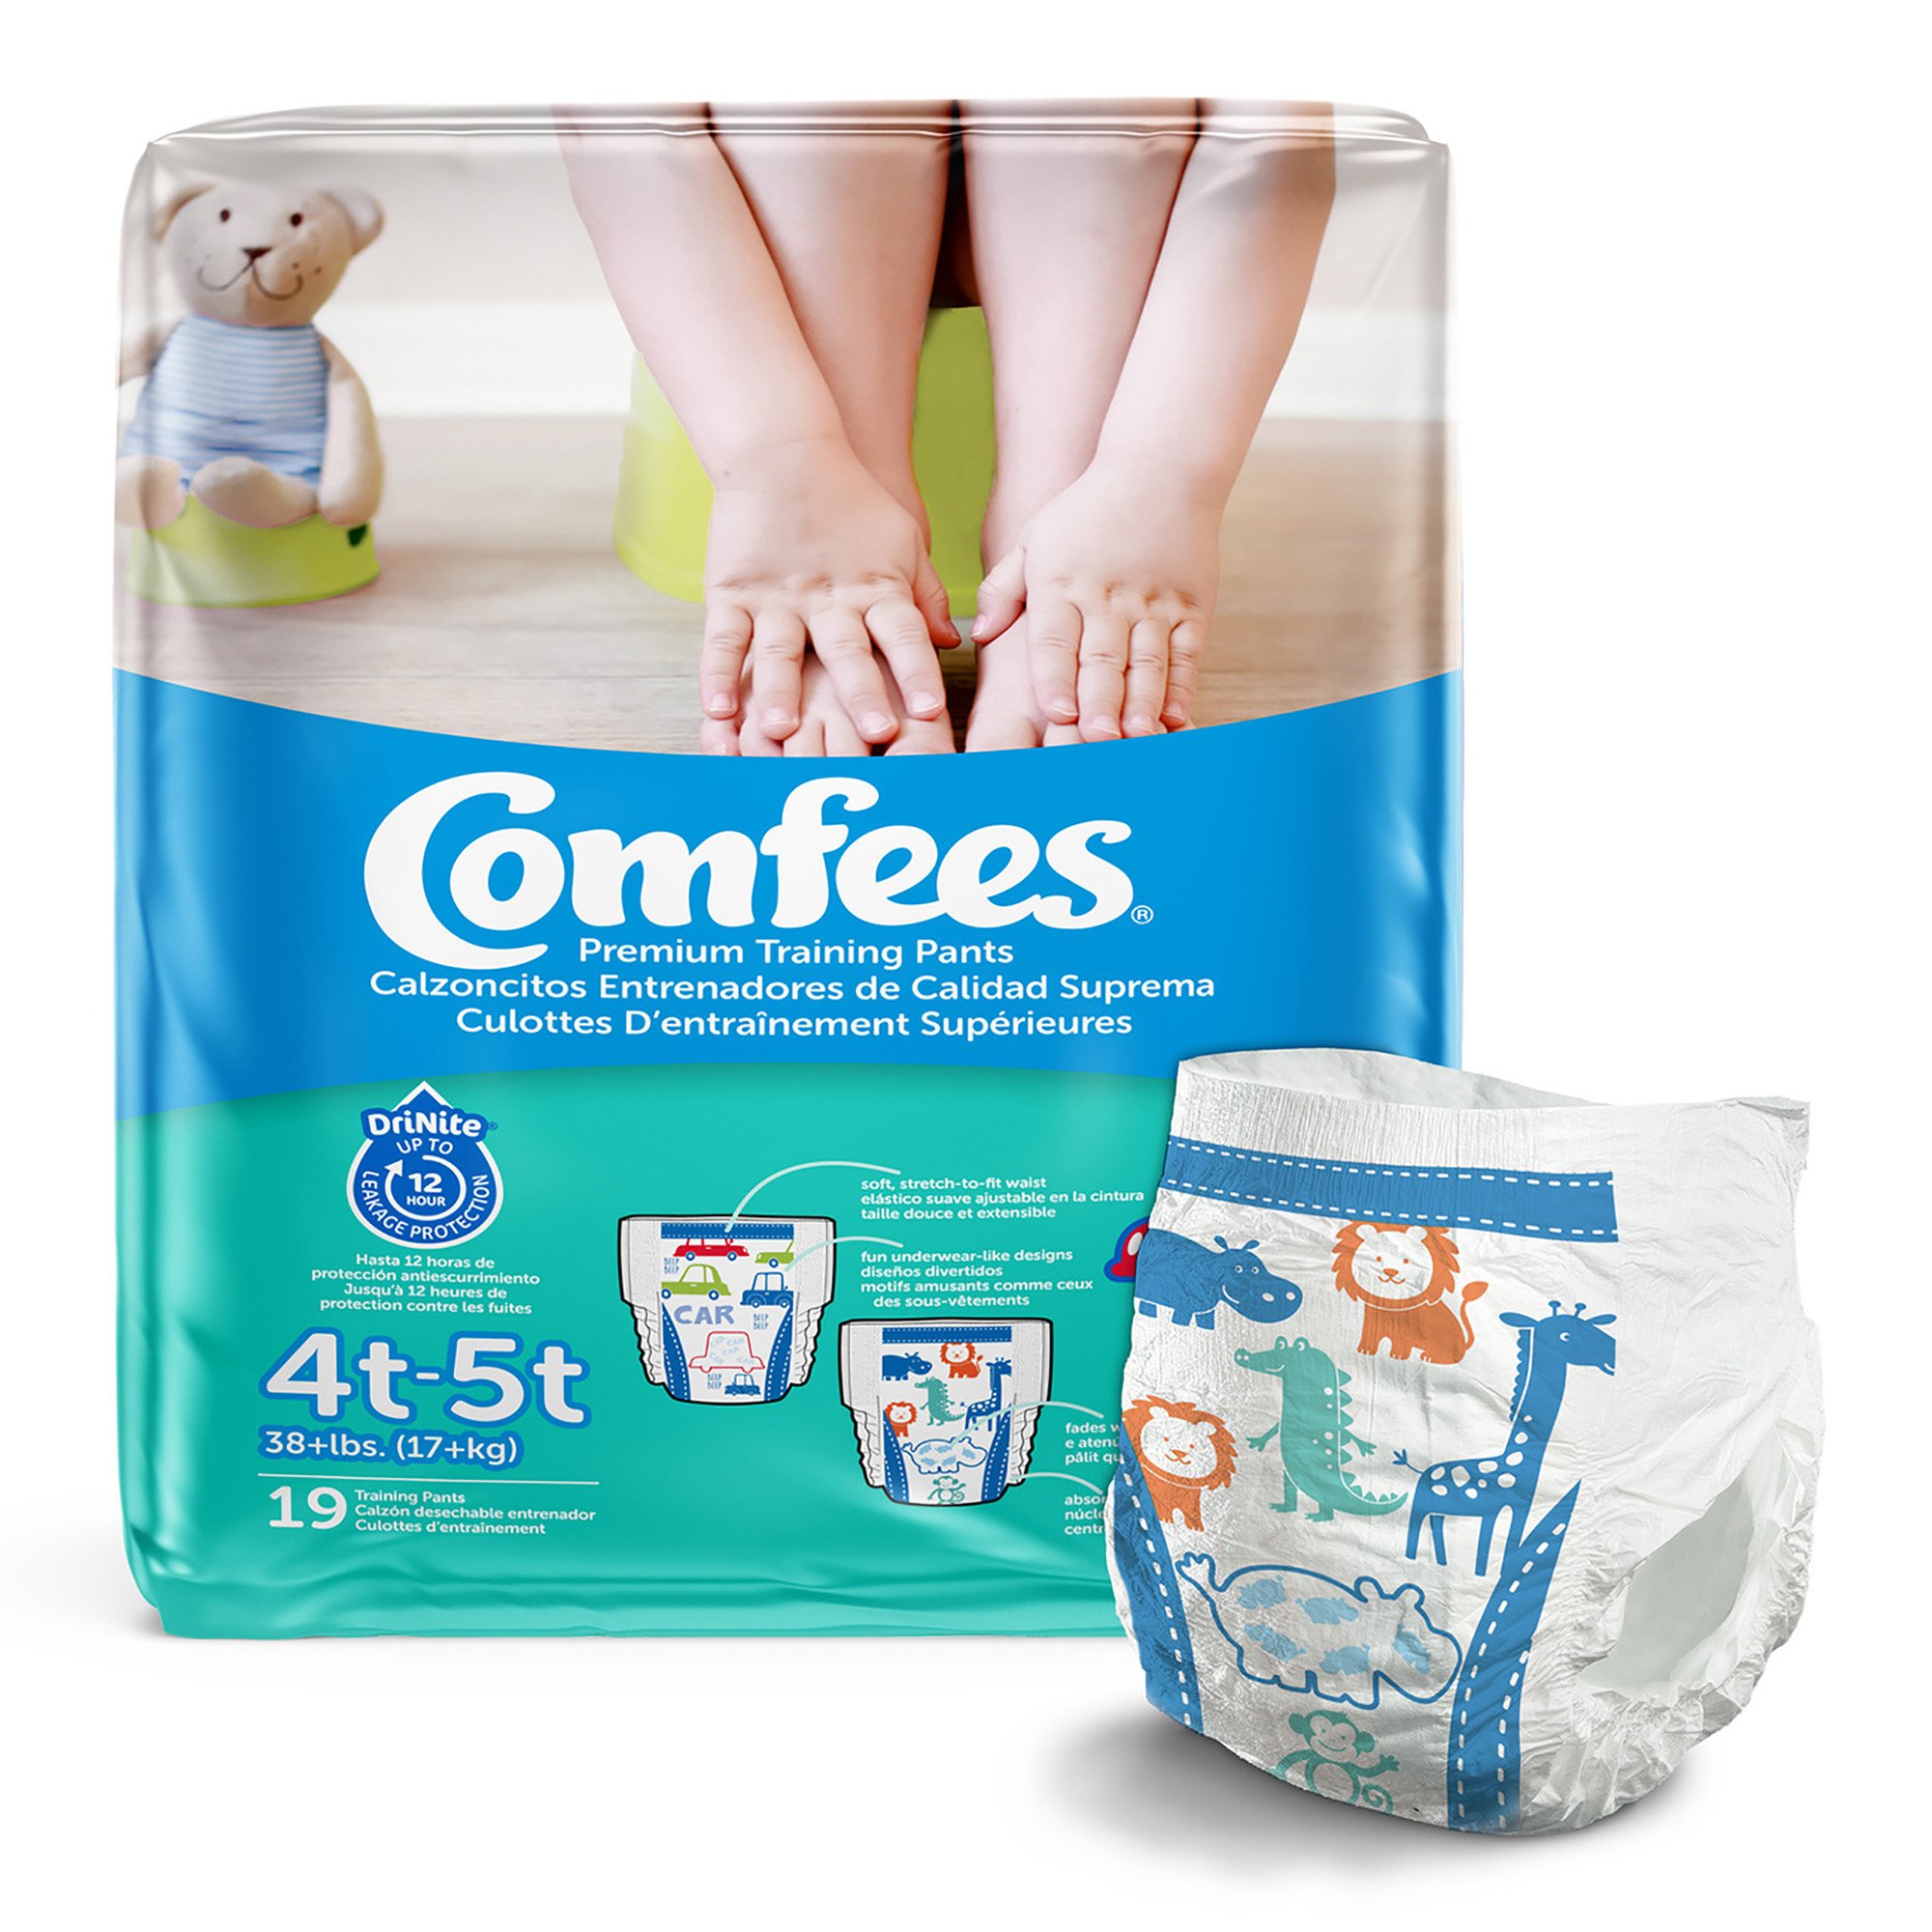 Comfees Training Pants for Boys, 12 hour leak protection 4T to 5T, over 38 lbs, 19 Count, 1 Pack - image 2 of 4